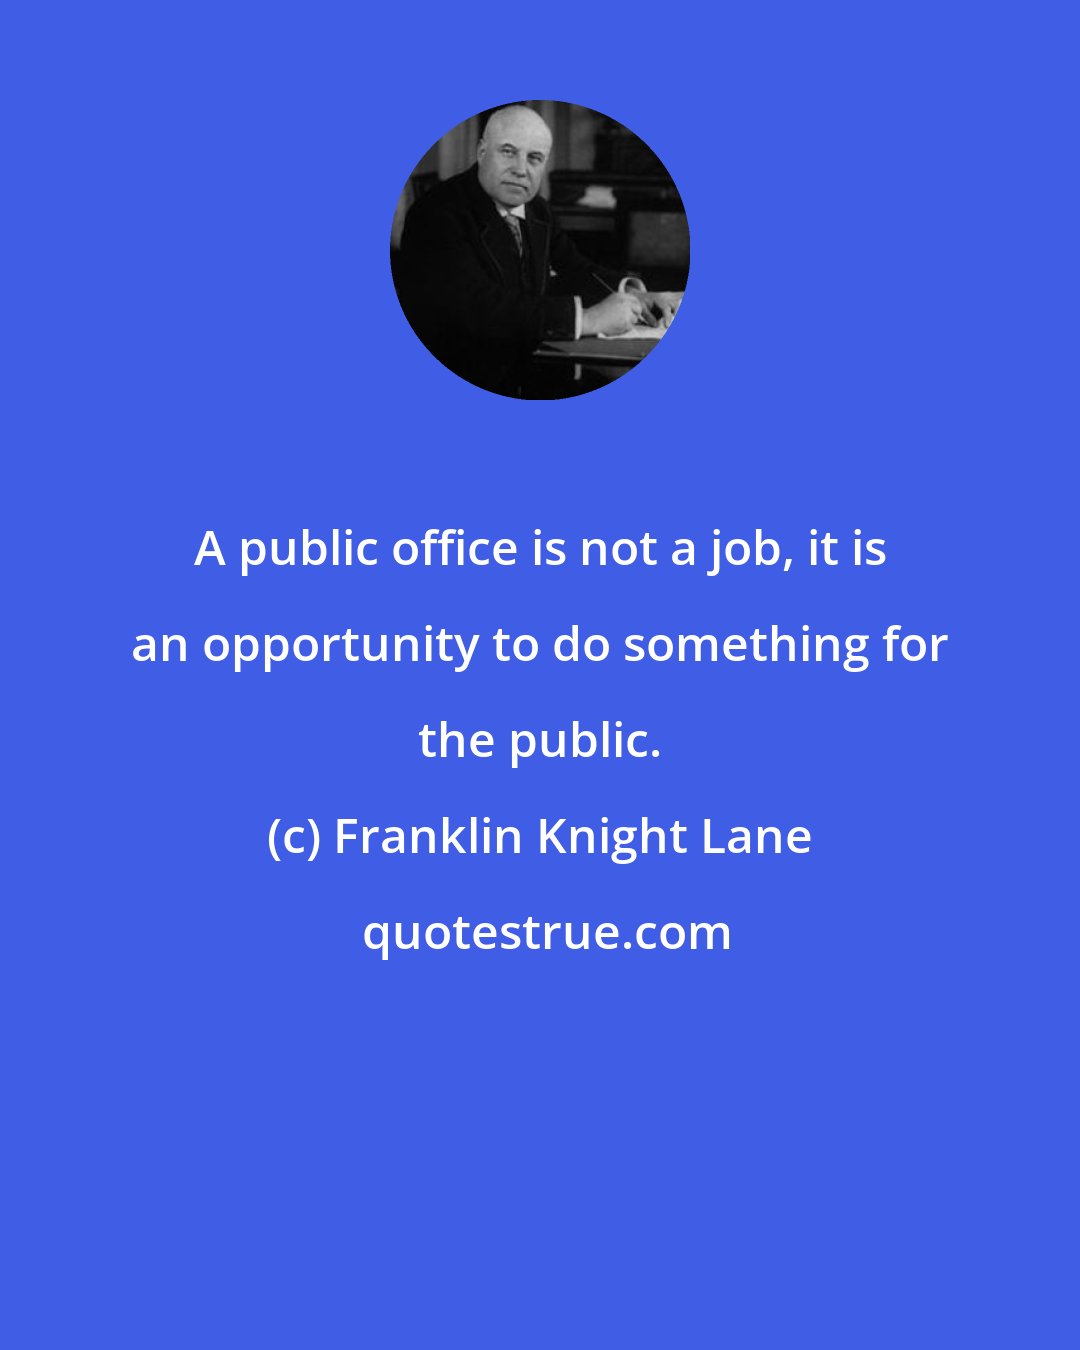 Franklin Knight Lane: A public office is not a job, it is an opportunity to do something for the public.